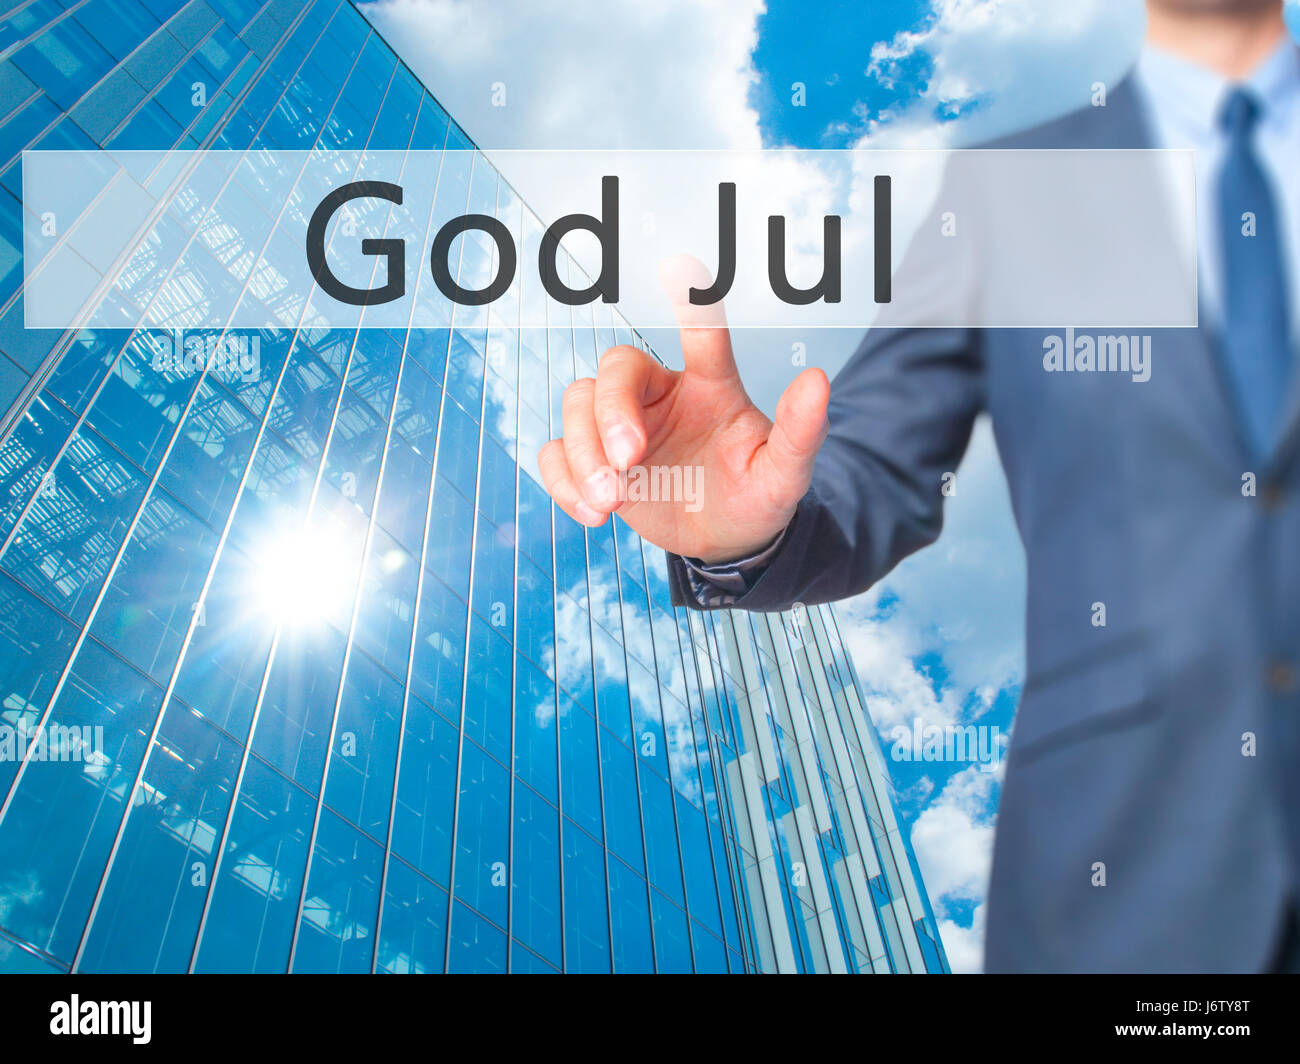 God Jul (Merry Christmas in Swedish) - Businessman hand pressing button on touch screen interface. Business, technology, internet concept. Stock Photo Stock Photo